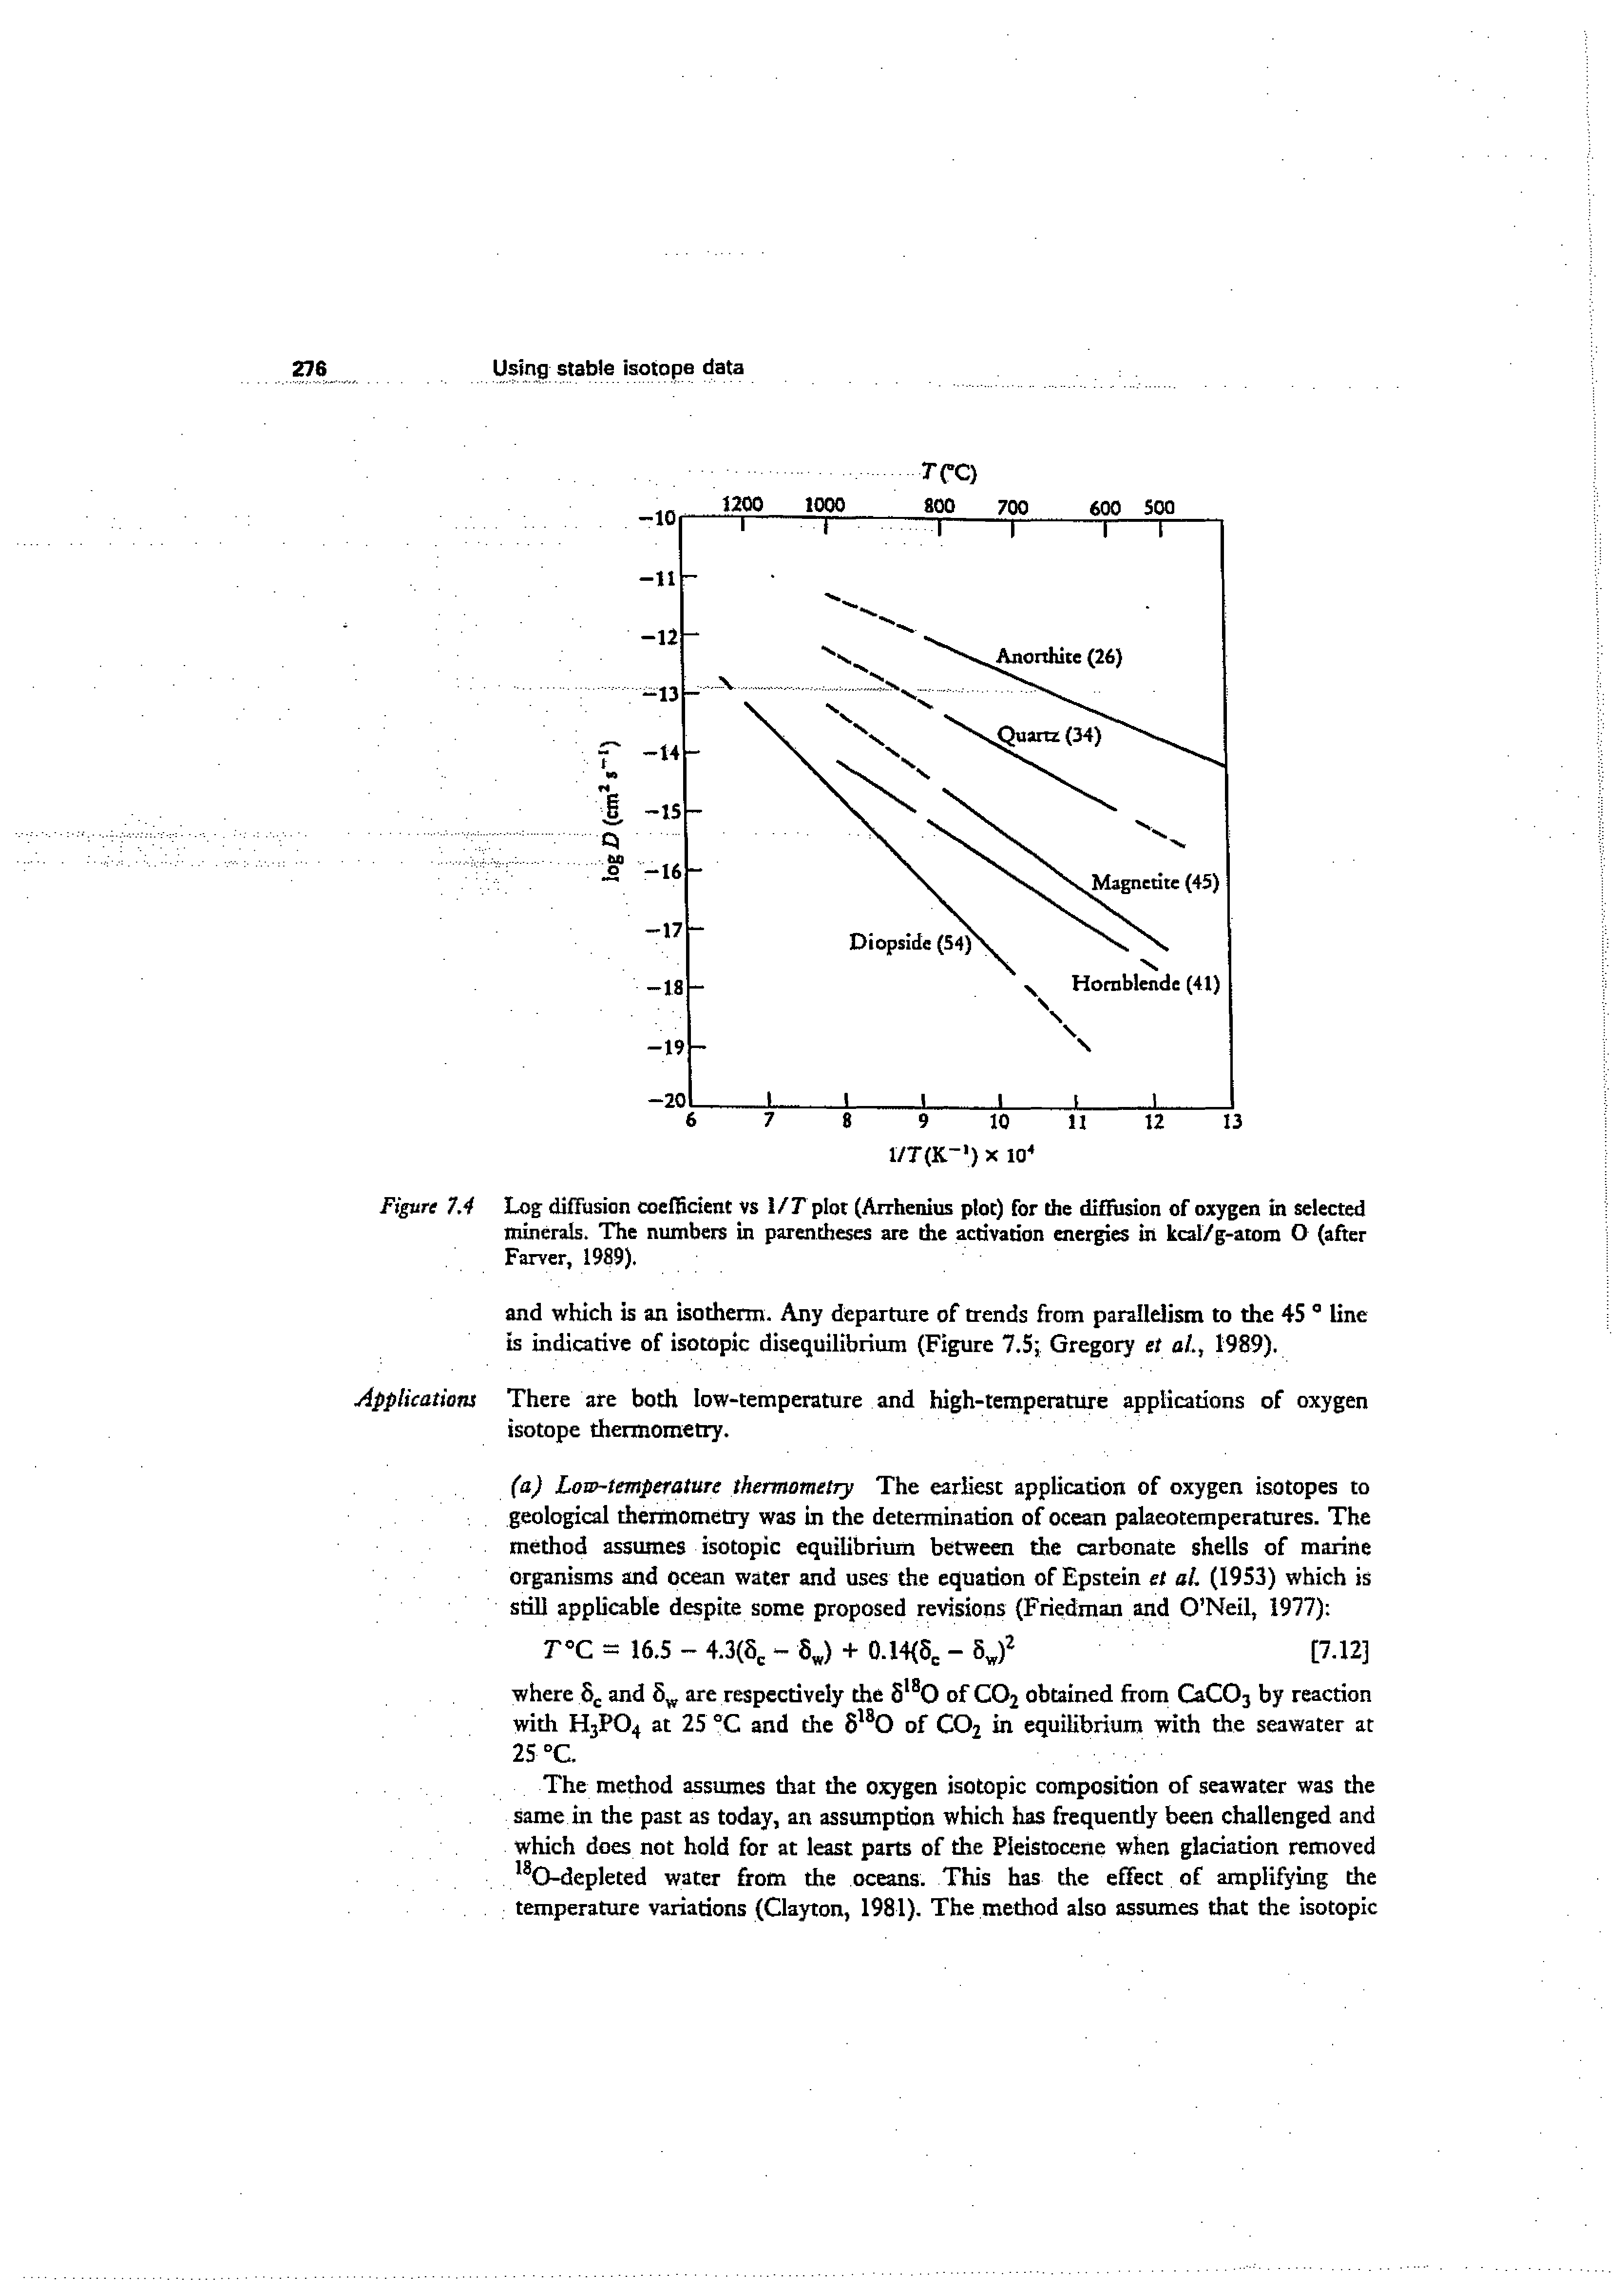 Figure 7,4 Log diffusion coefScienC vs i/7 plot (Arrhenius plot) for the di0tision of oxygen m selected minerals. The numbers in parencbeses are the activation energies In kcal/g-atom O (after Farver, 1989).